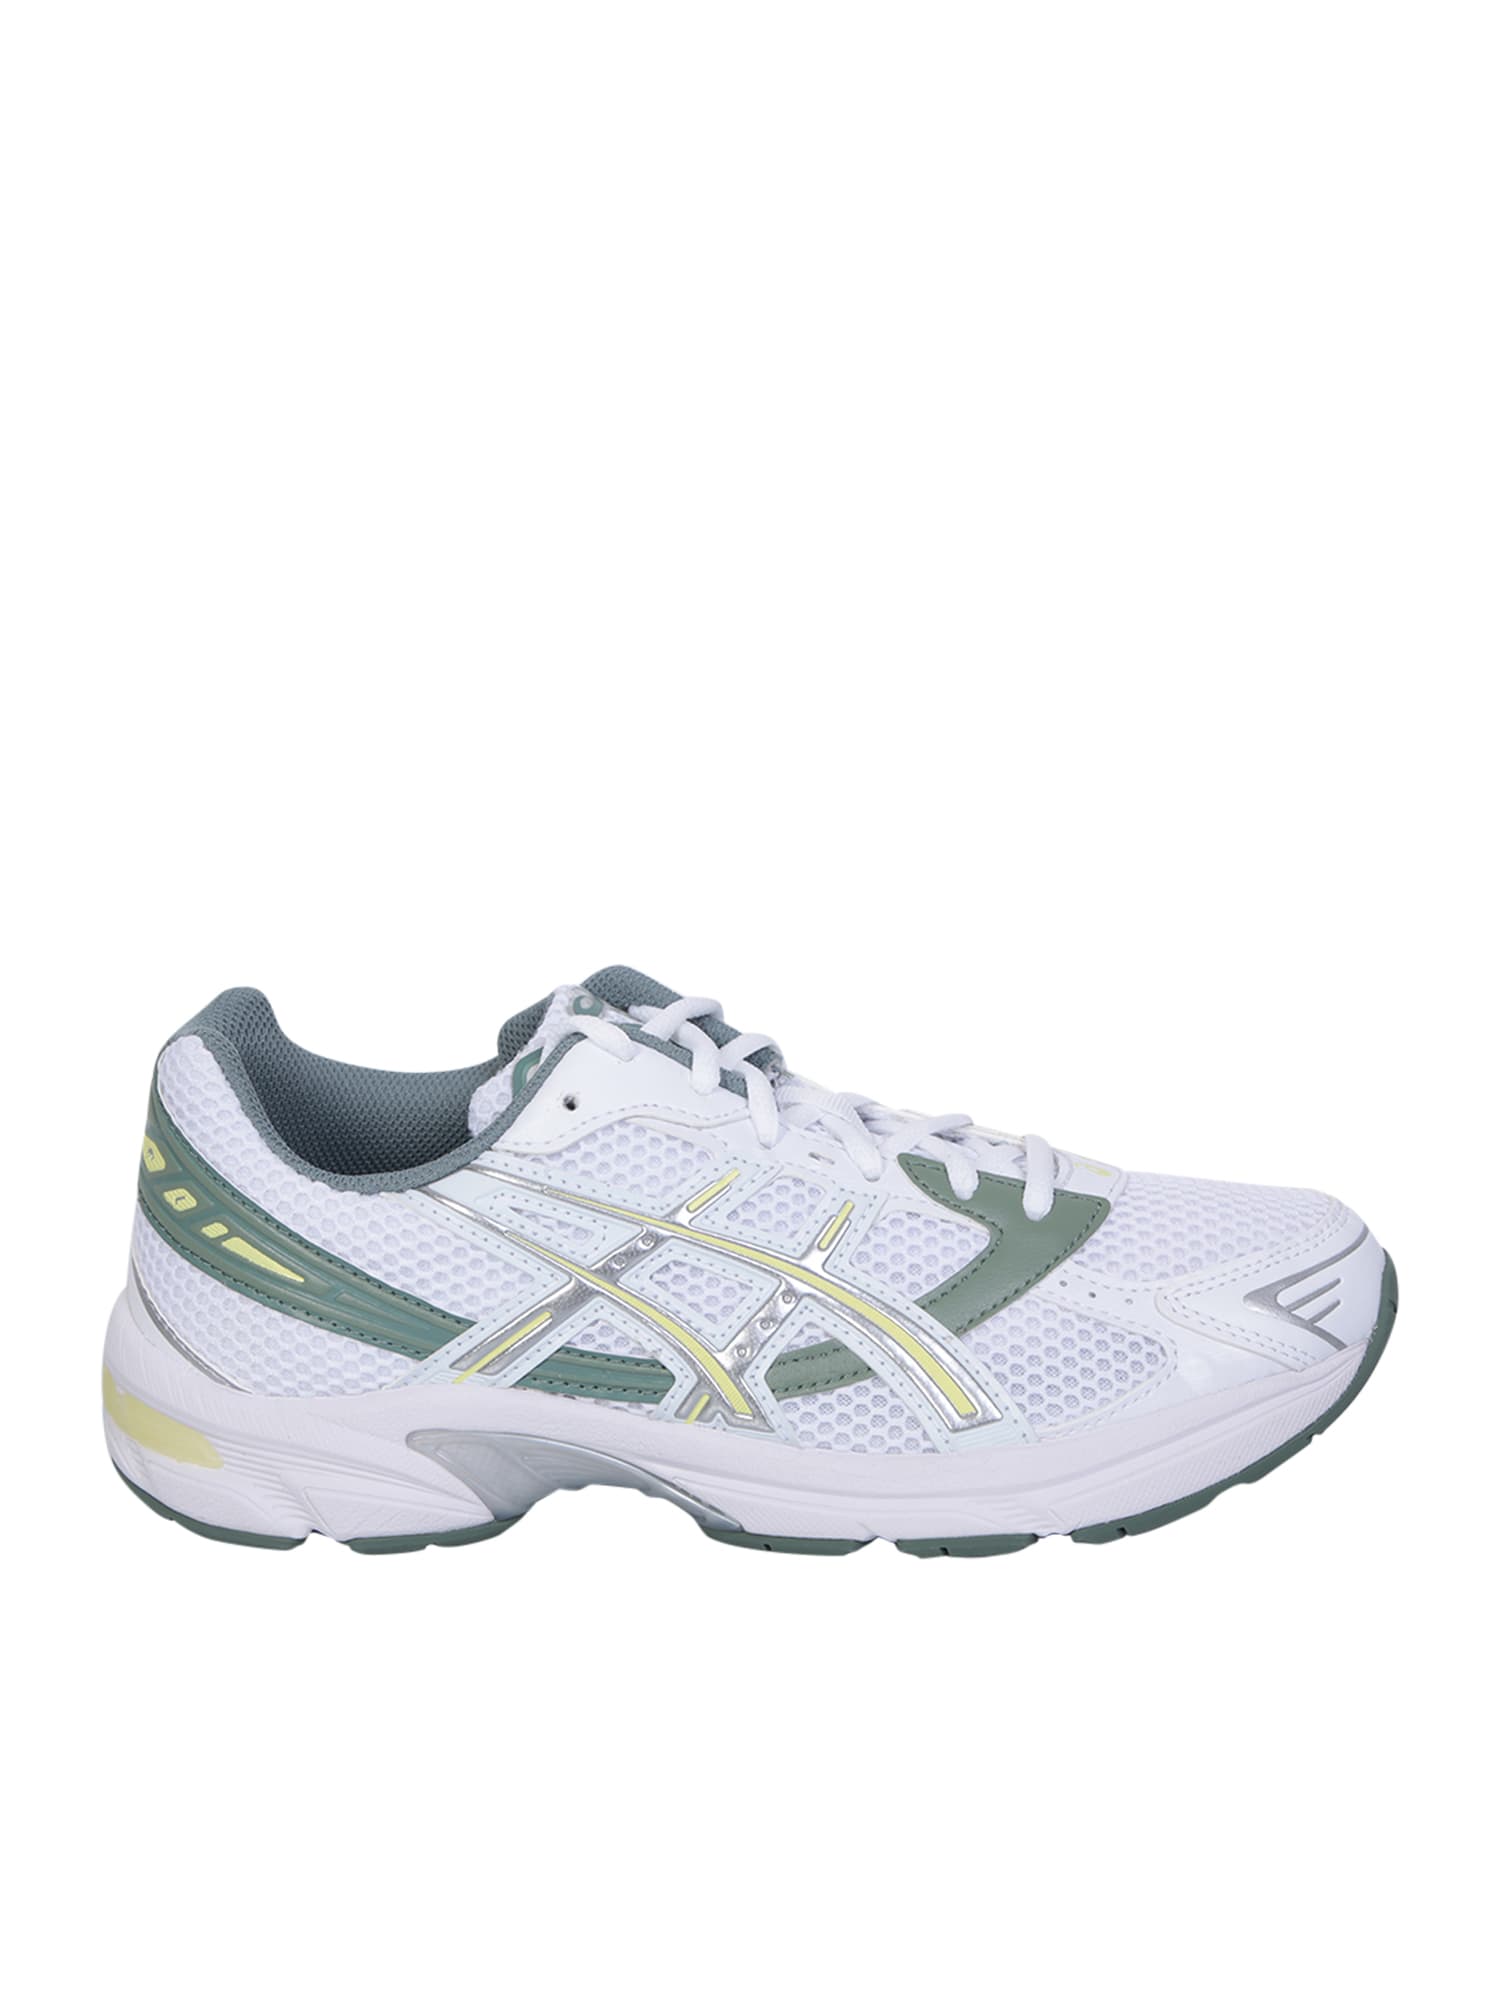 Shop Asics White And Green Gel-1130 Sneakers